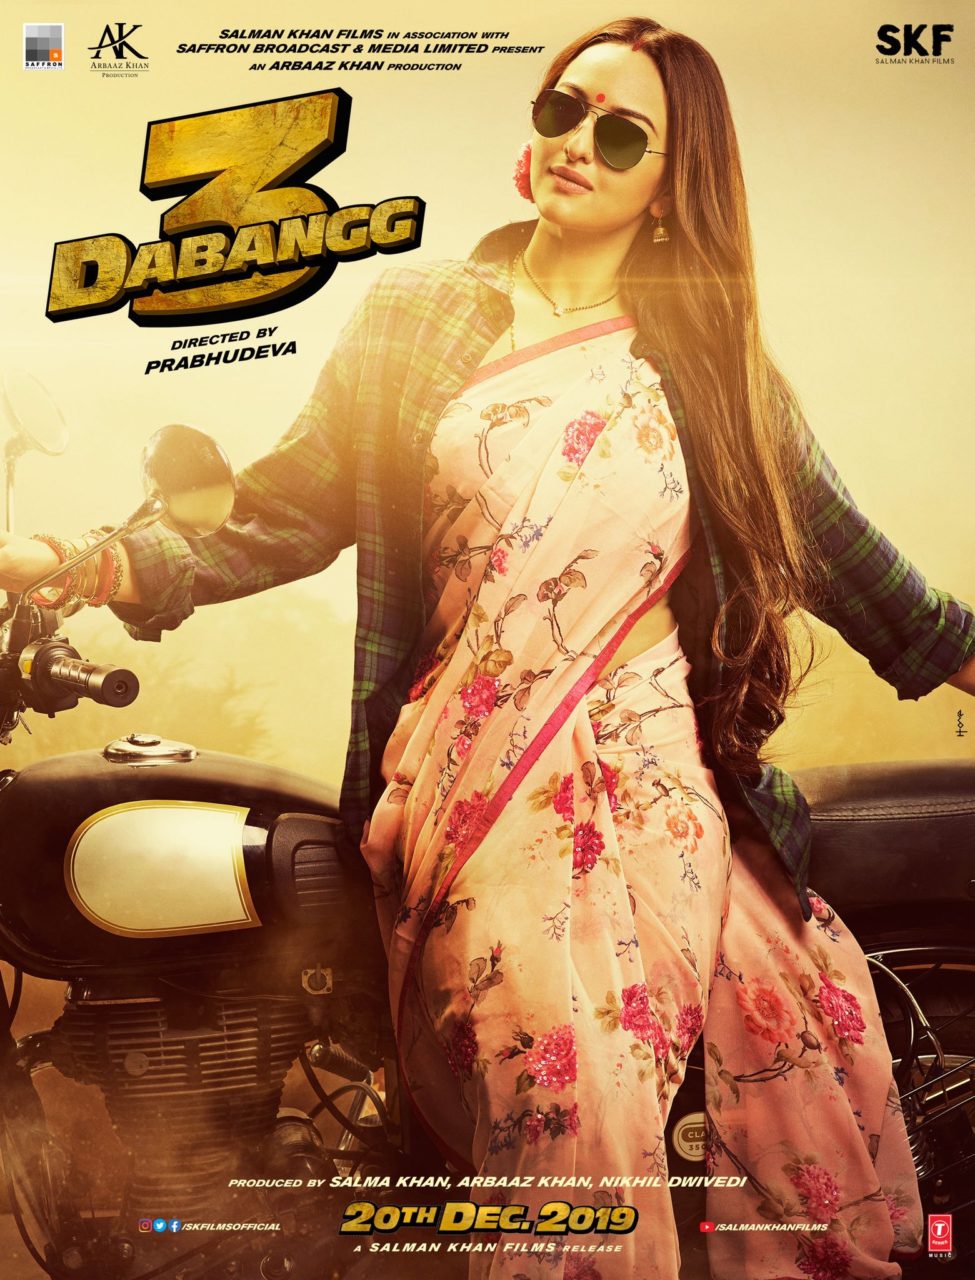 New Poster Of Dabangg 3 Unveiled Introducing Sonakshi Sinha In A New